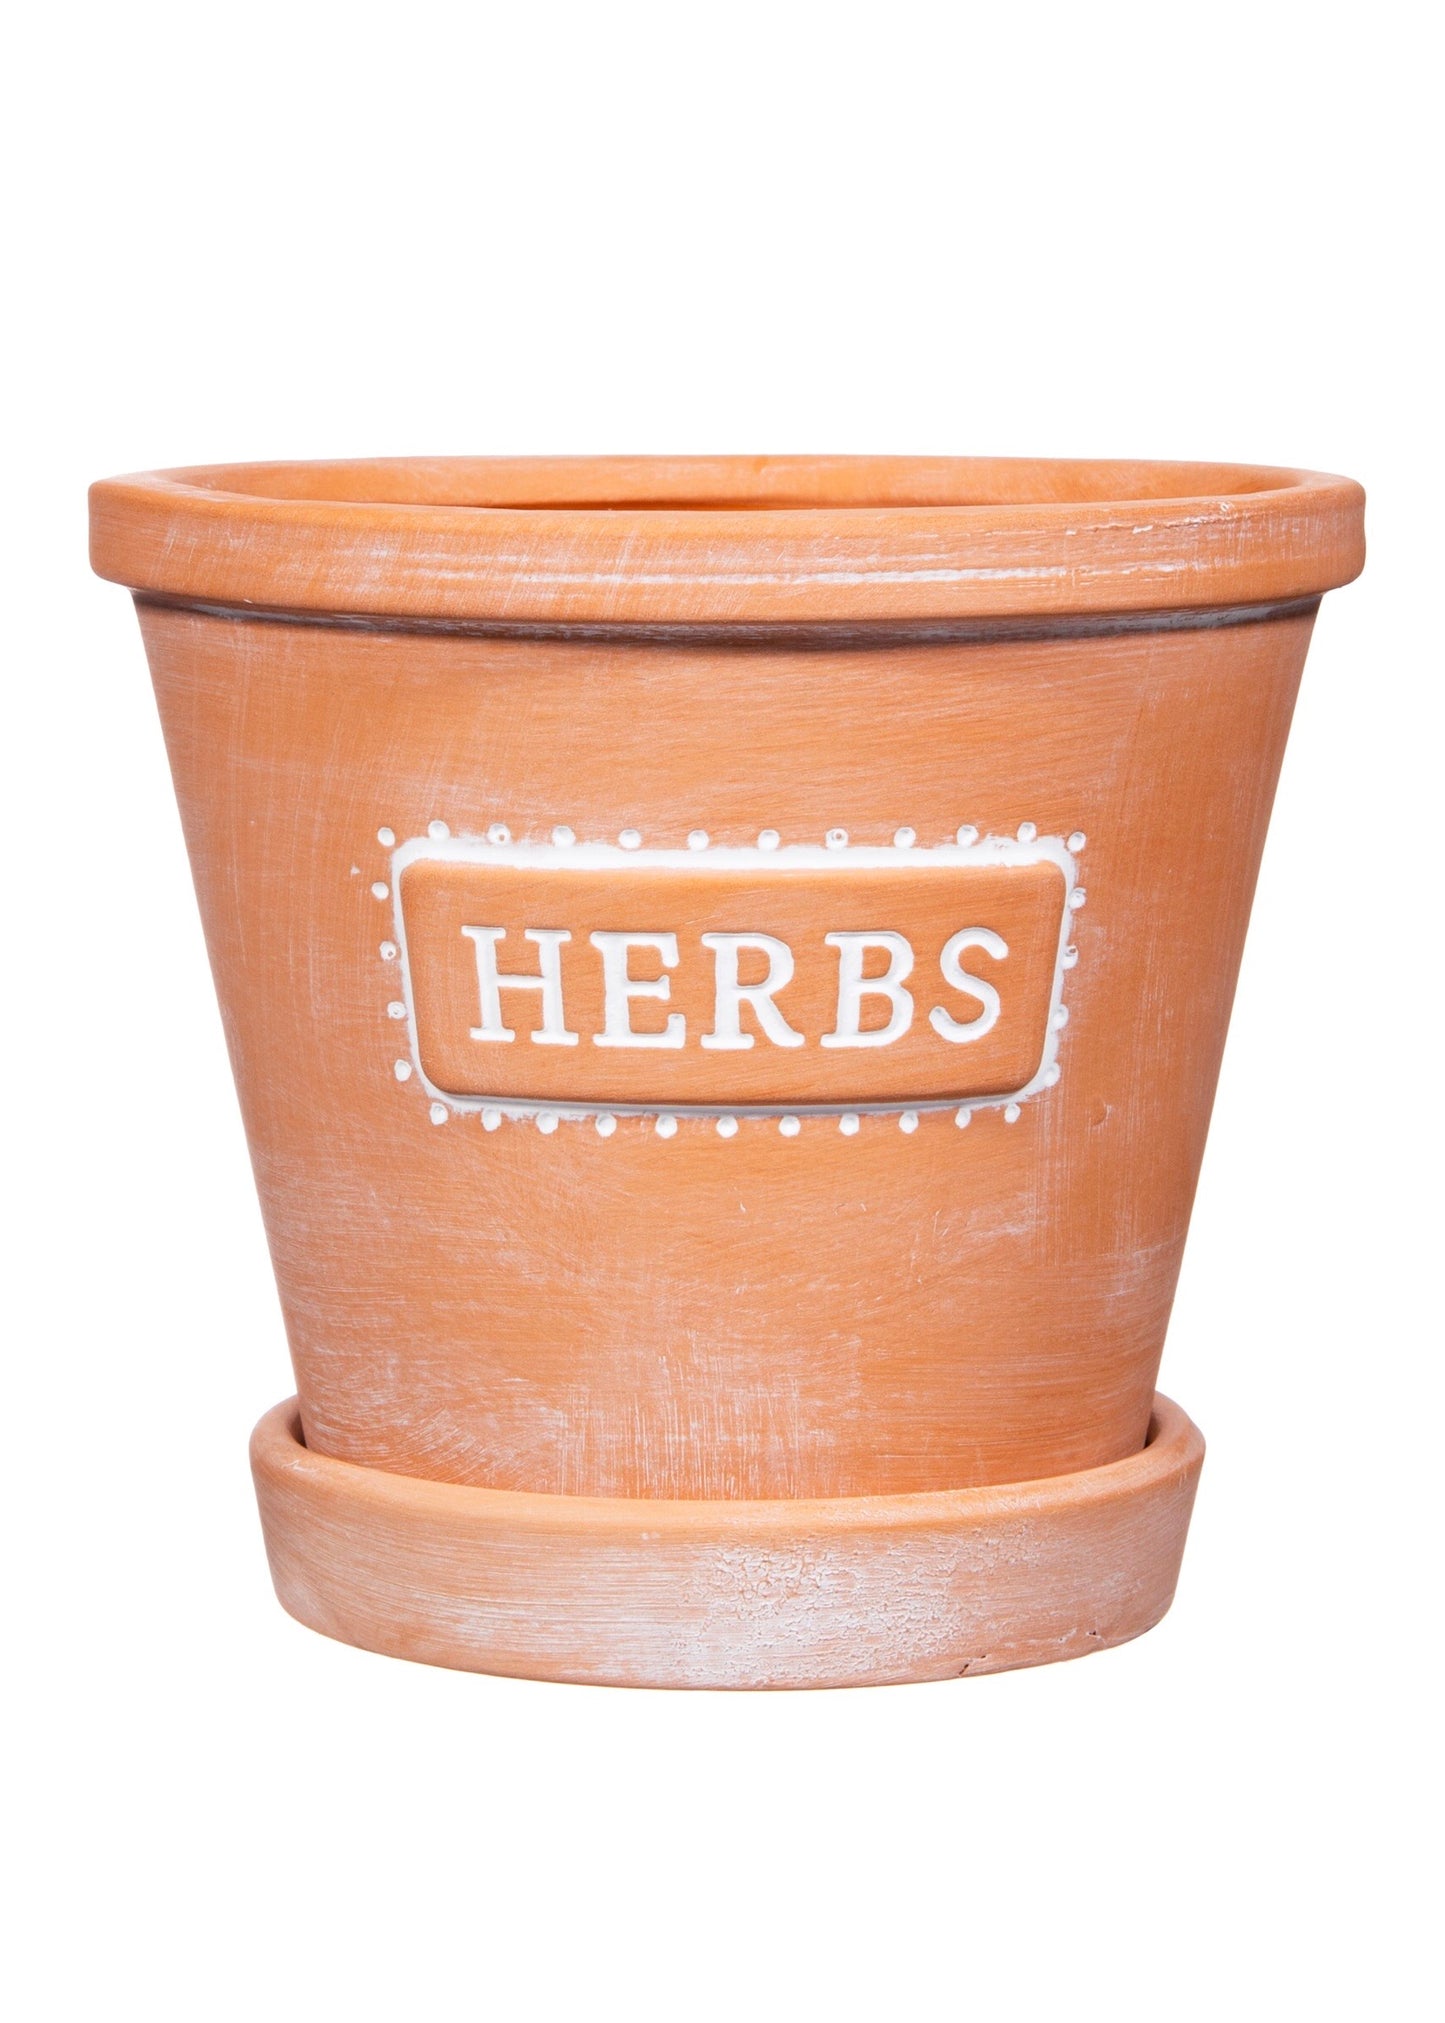 Terracota plantpot with herb written on front in white detailing